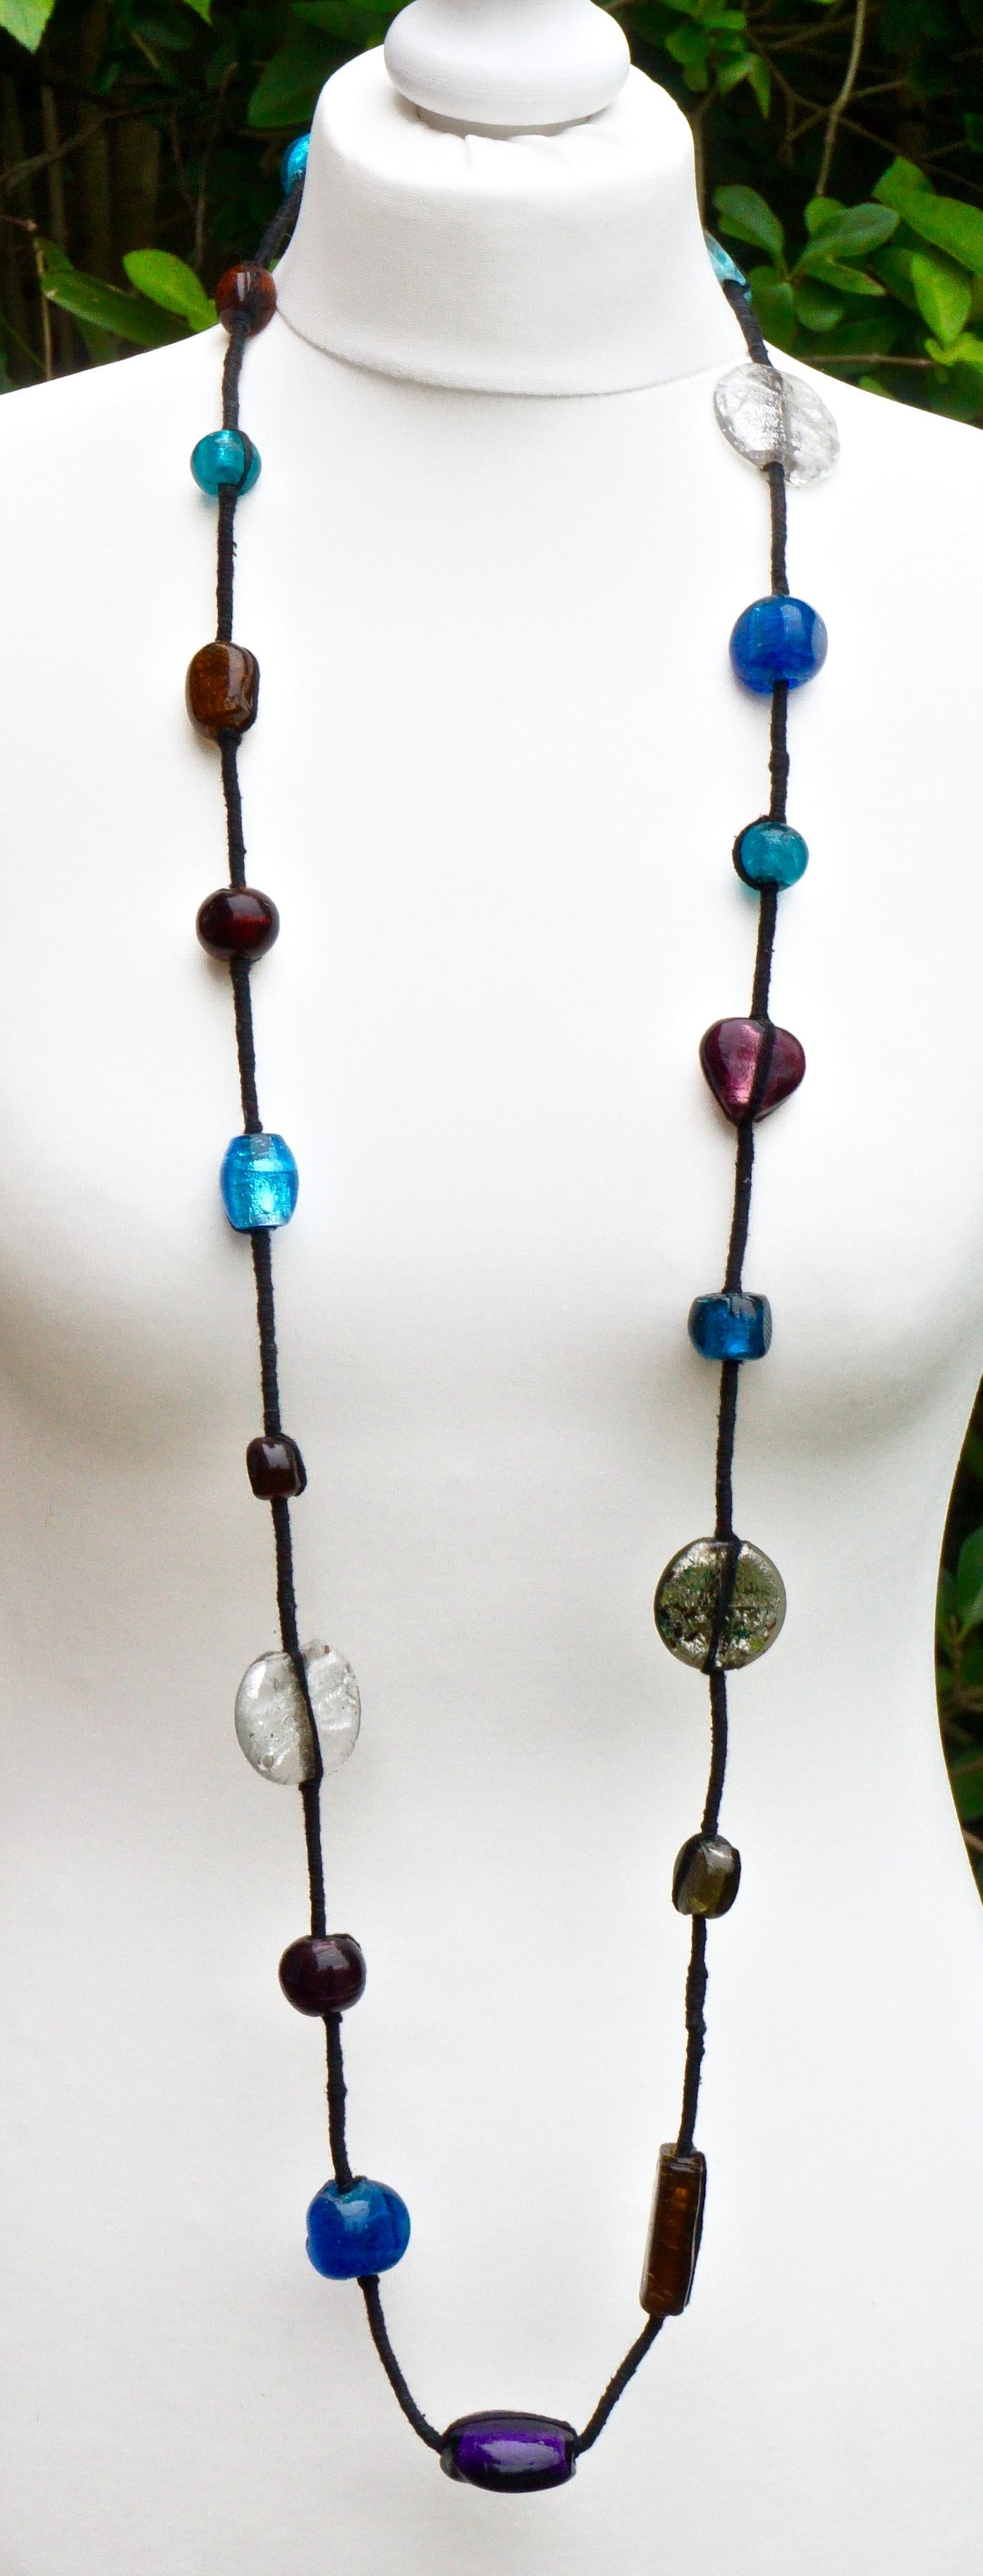 Long Tibetan necklace featuring beautiful hand made foiled art glass beads on woven black thread. The beads are of different sizes, shapes and colours. Length 134cm / 52.75 inches, and the large white beads are 3.5cm / 1.38 inches by 3cm / 1.18